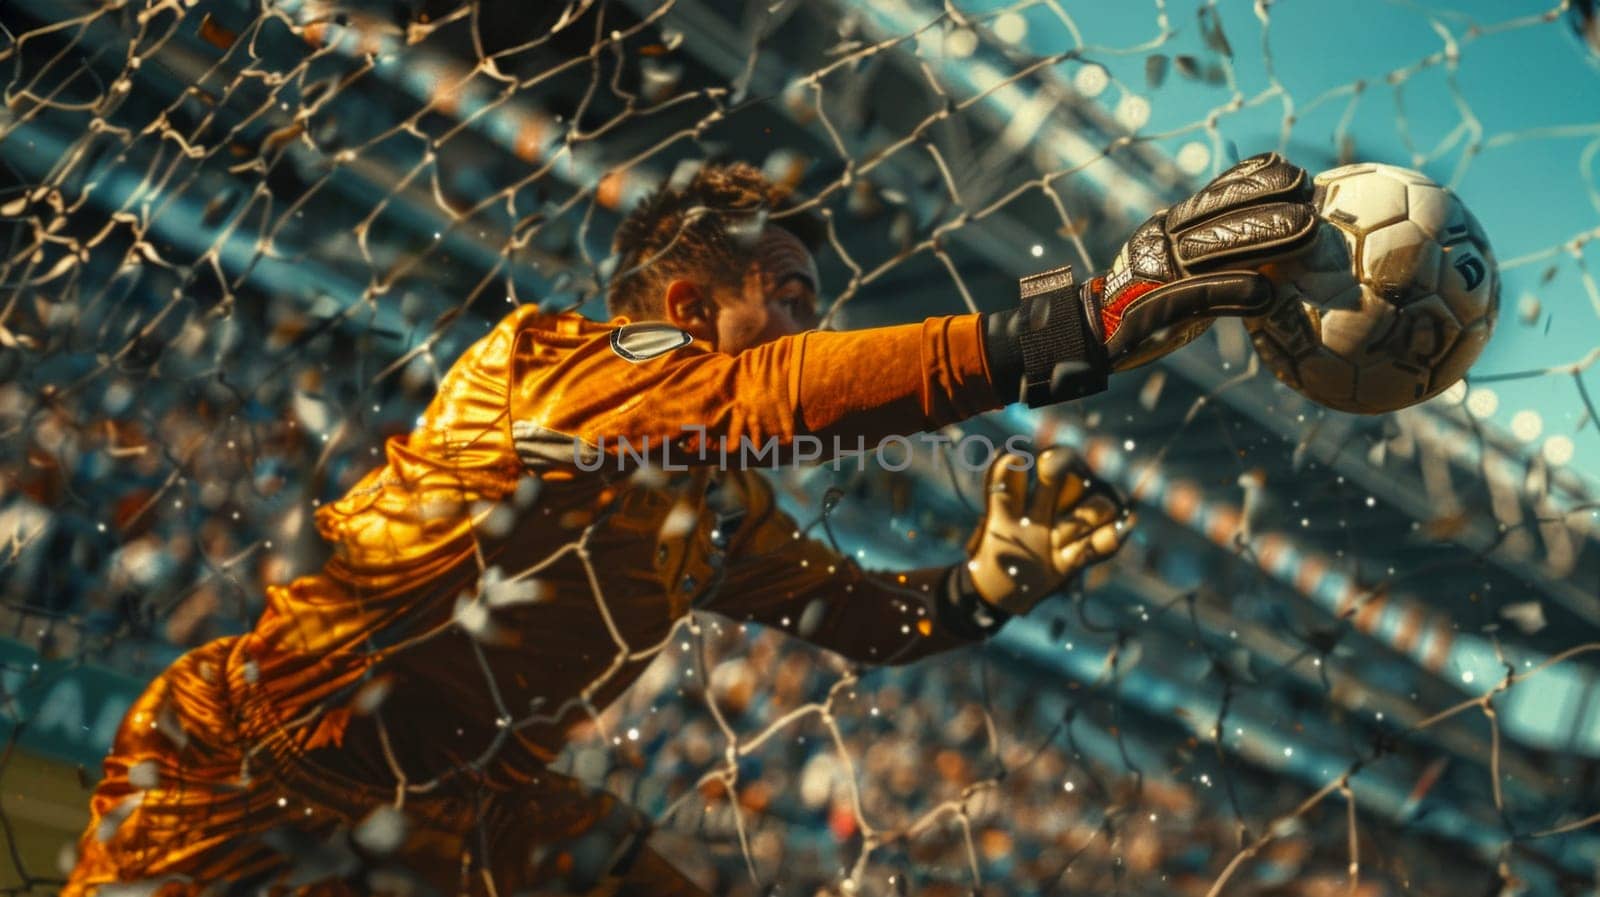 A man in an orange and black uniform holds a soccer ball confidently in front of a goal, embodying the role of a skilled goalkeeper by but_photo